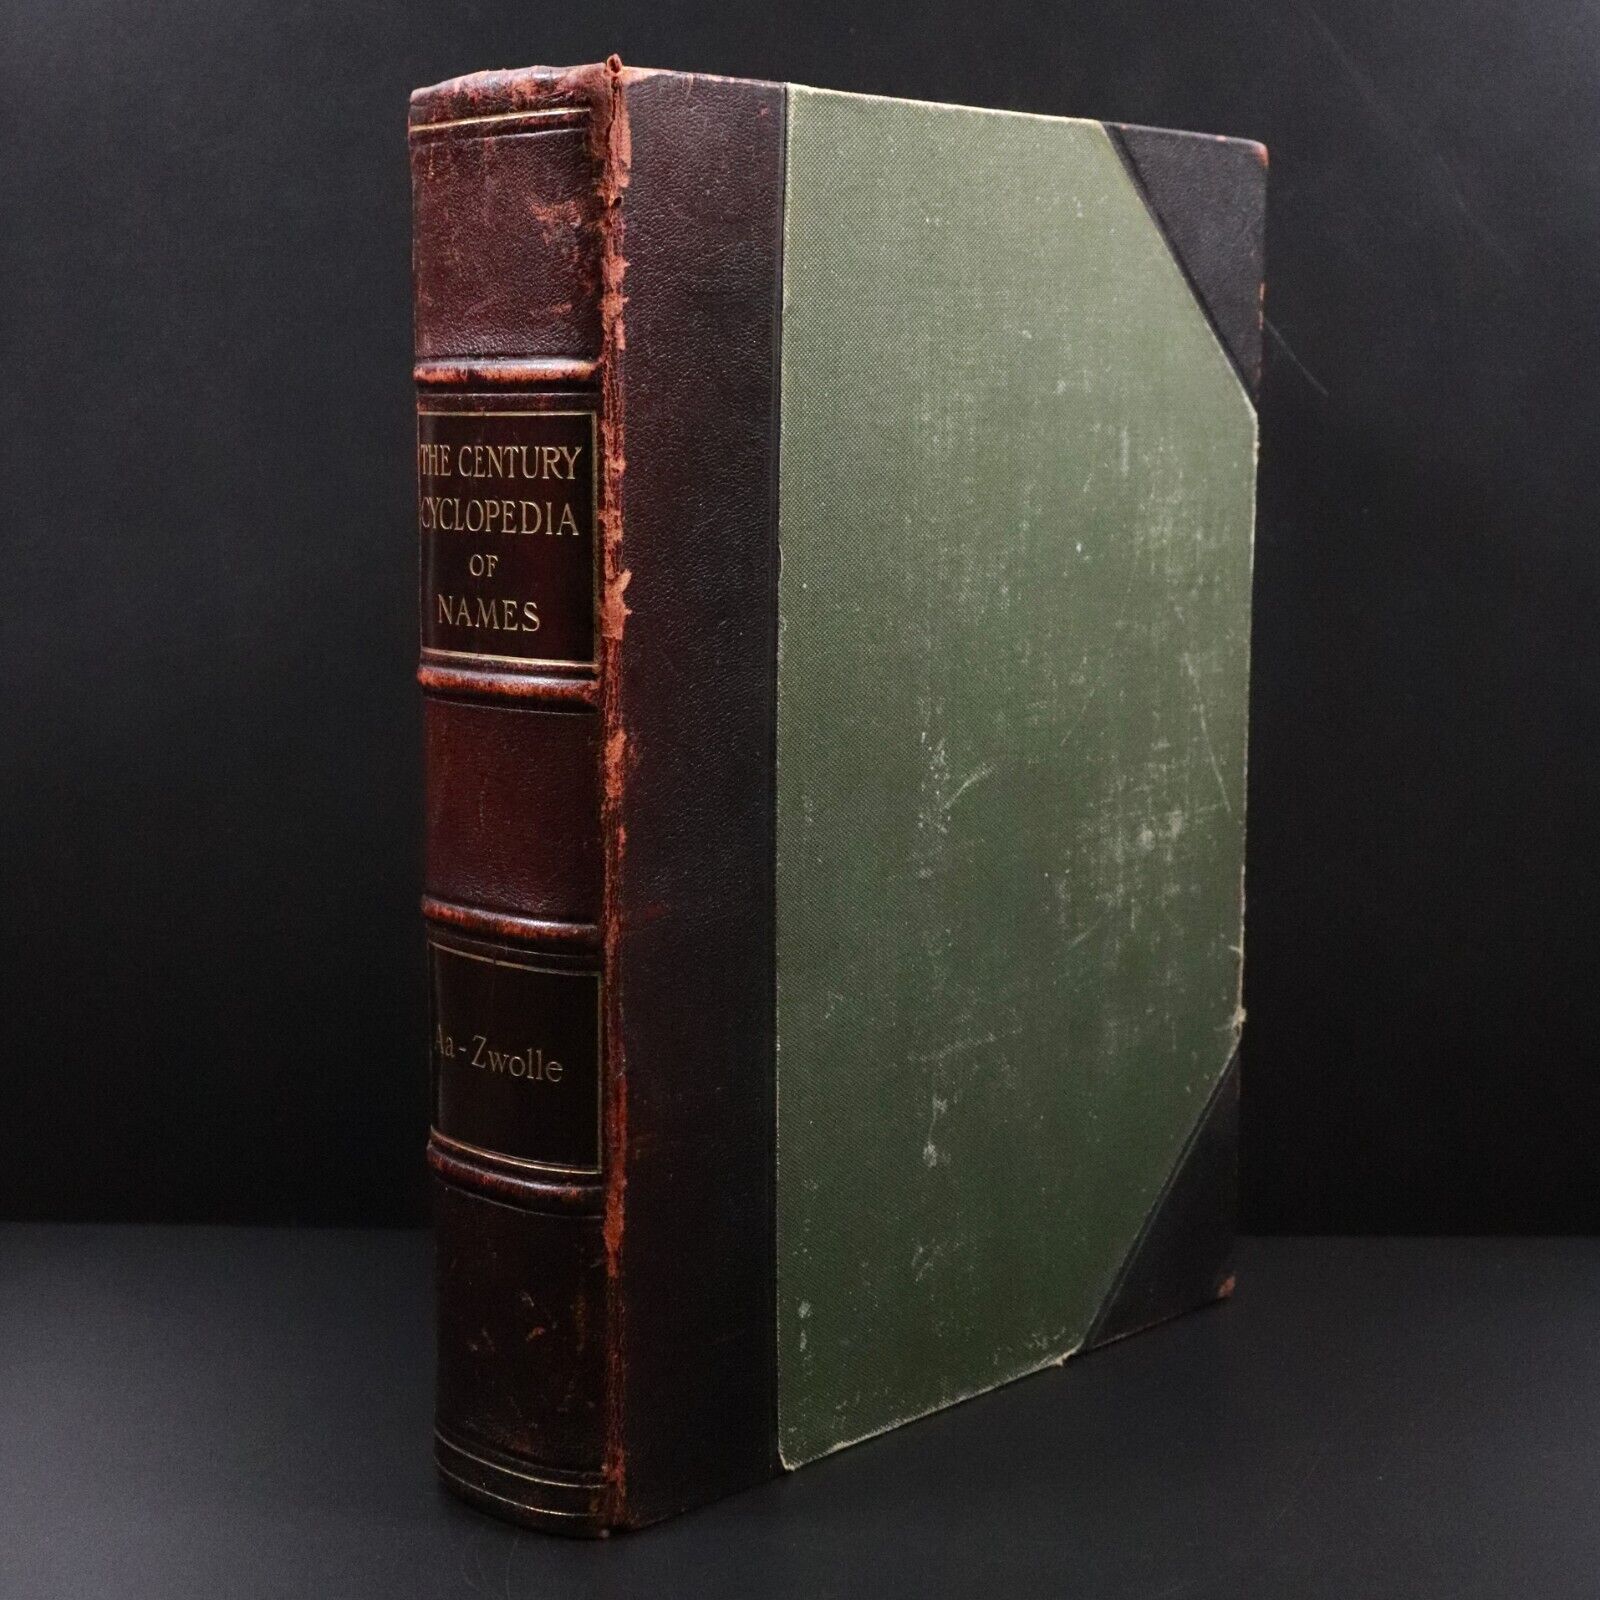 1904 The Century Cyclopedia Of Names by B.E. Smith Antique Names Reference Book